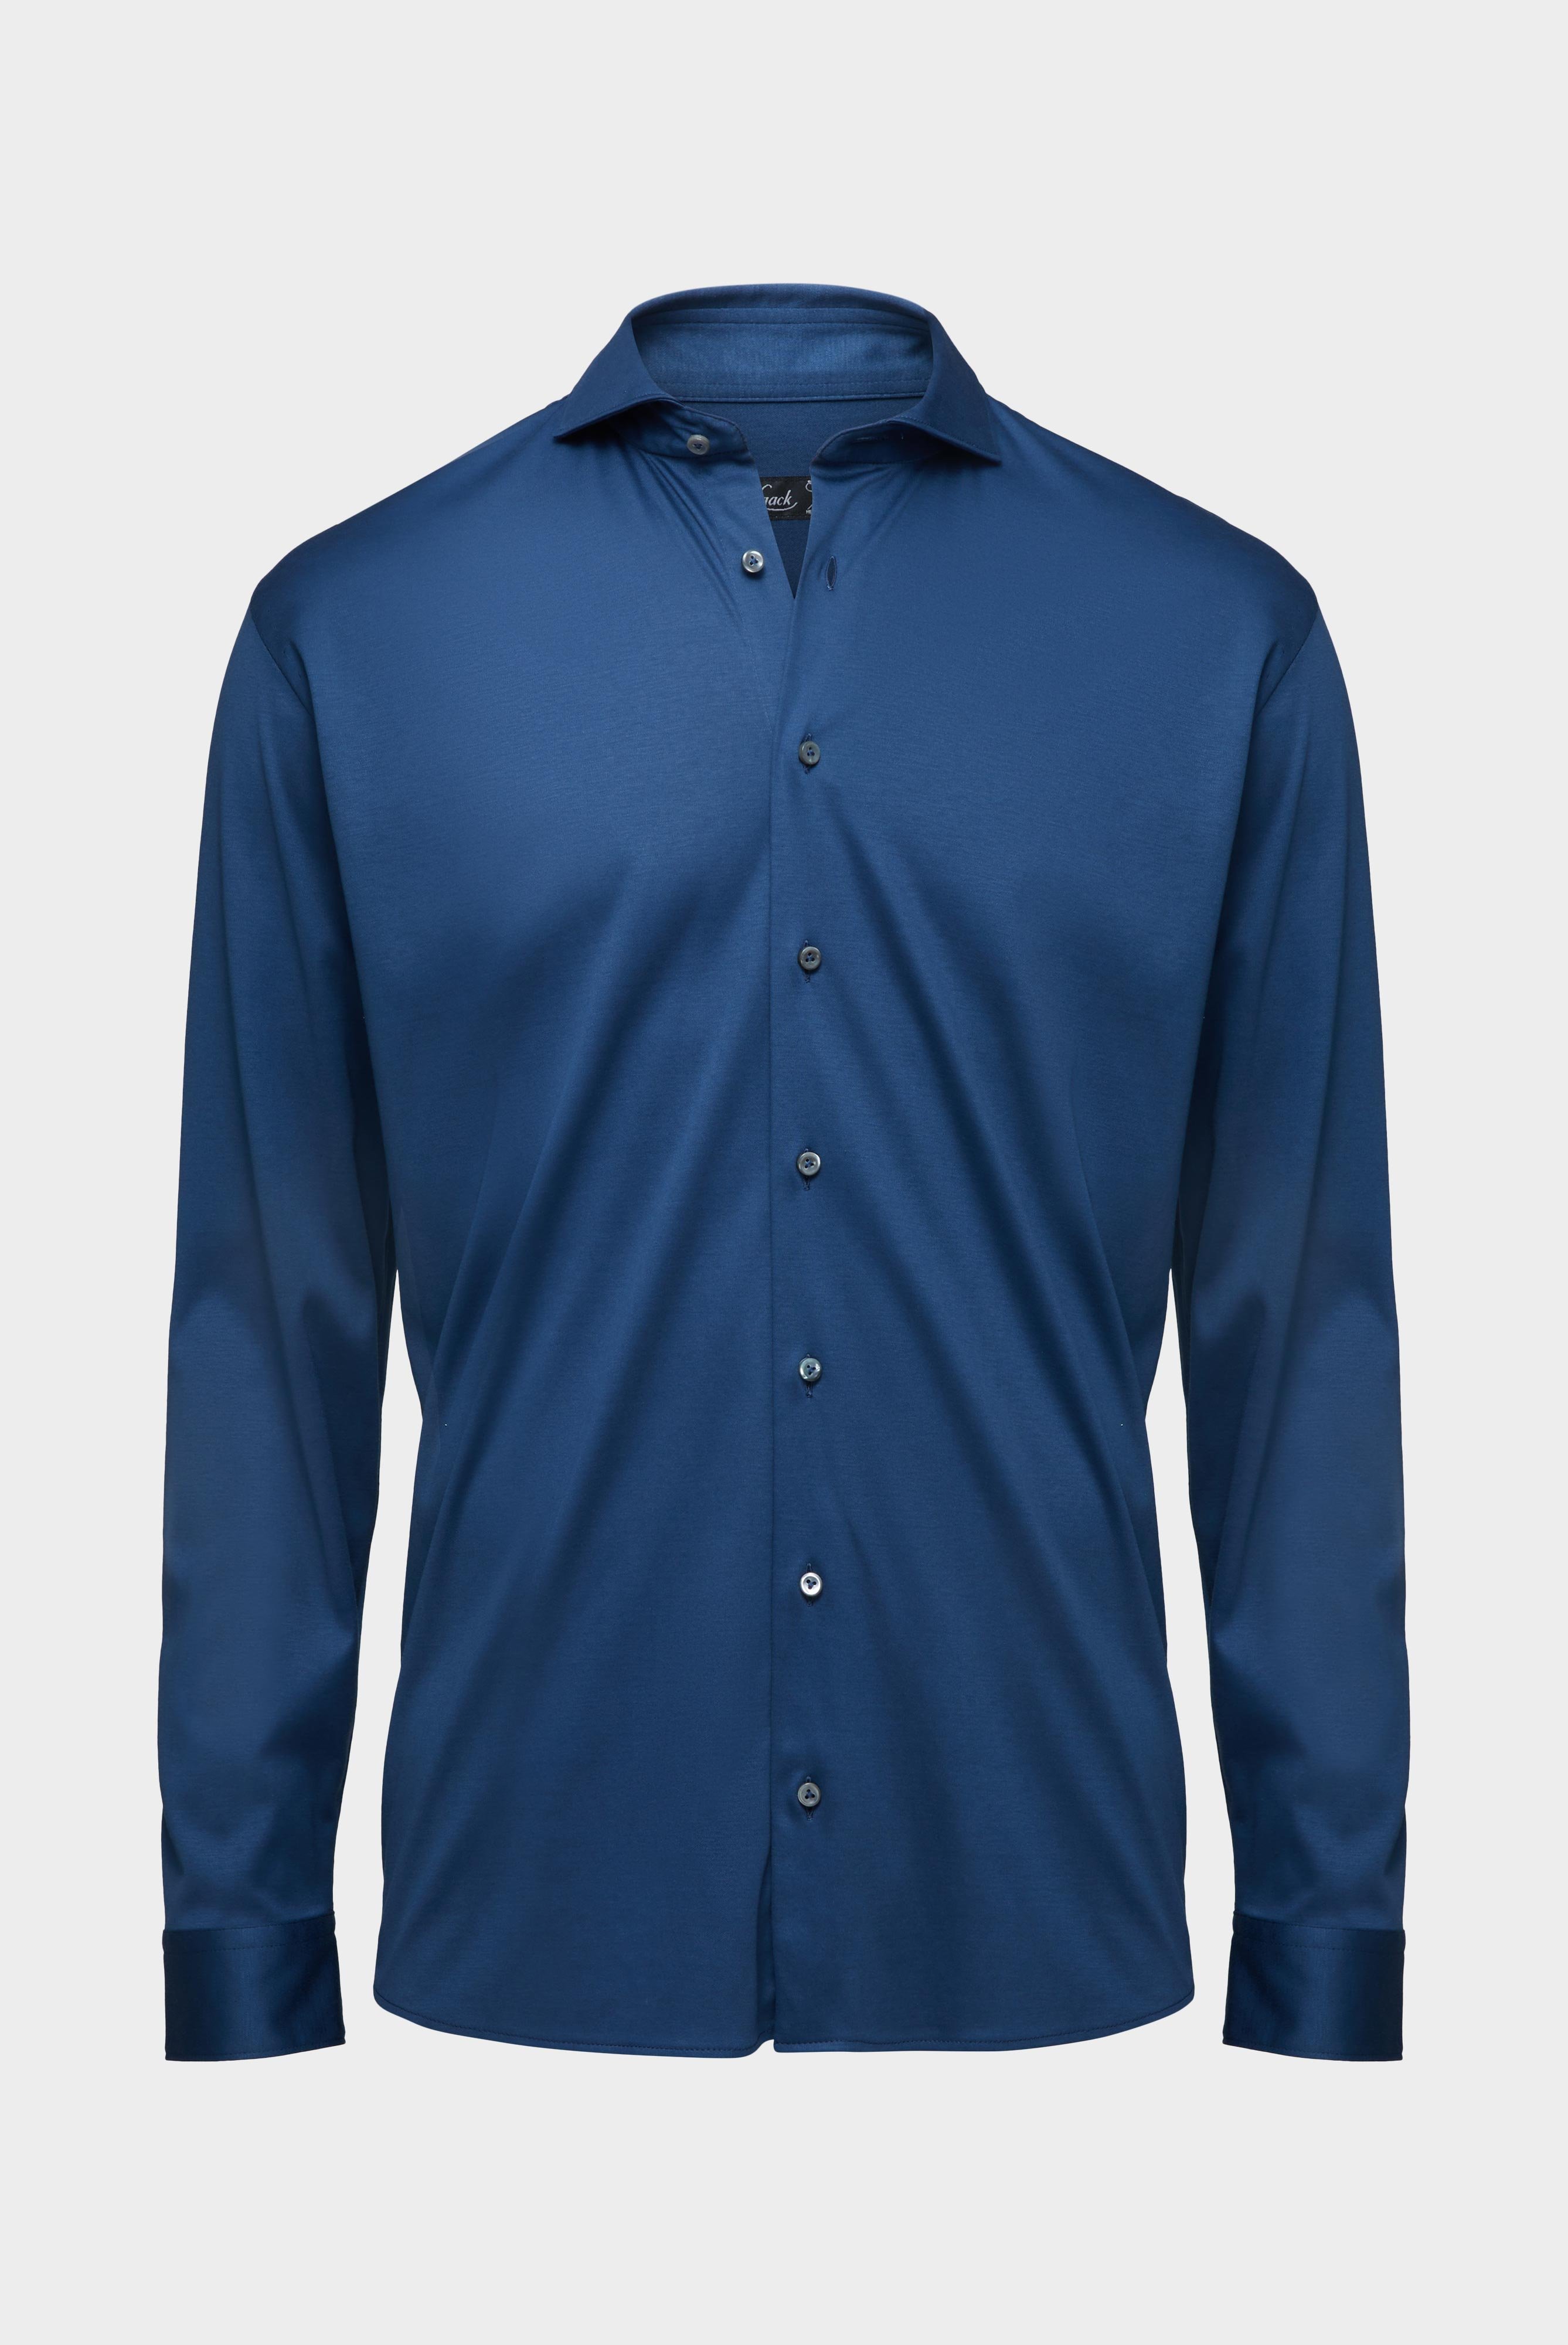 Casual Shirts+Jersey Shirt Swiss Cotton Tailor Fit+20.1683.UC.180031.780.S